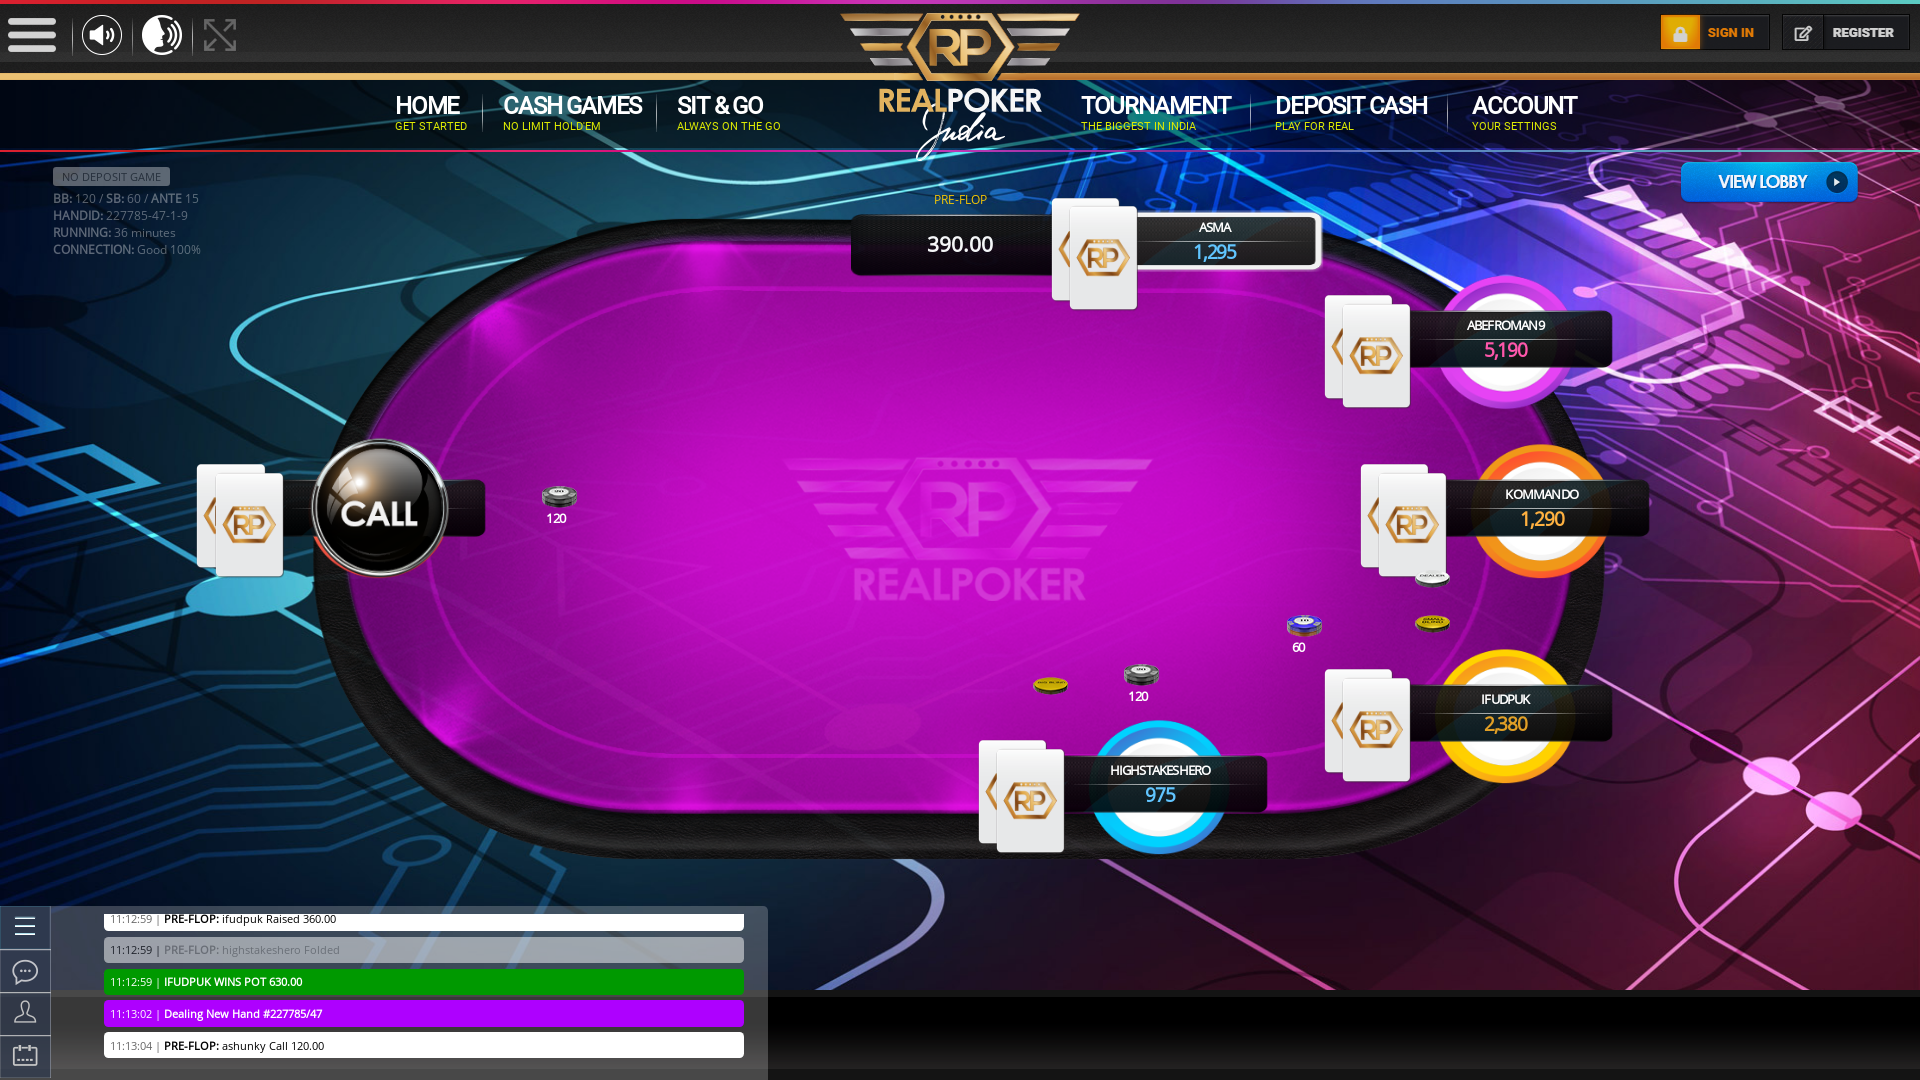 Real poker 10 player table in the 36th minute of the match